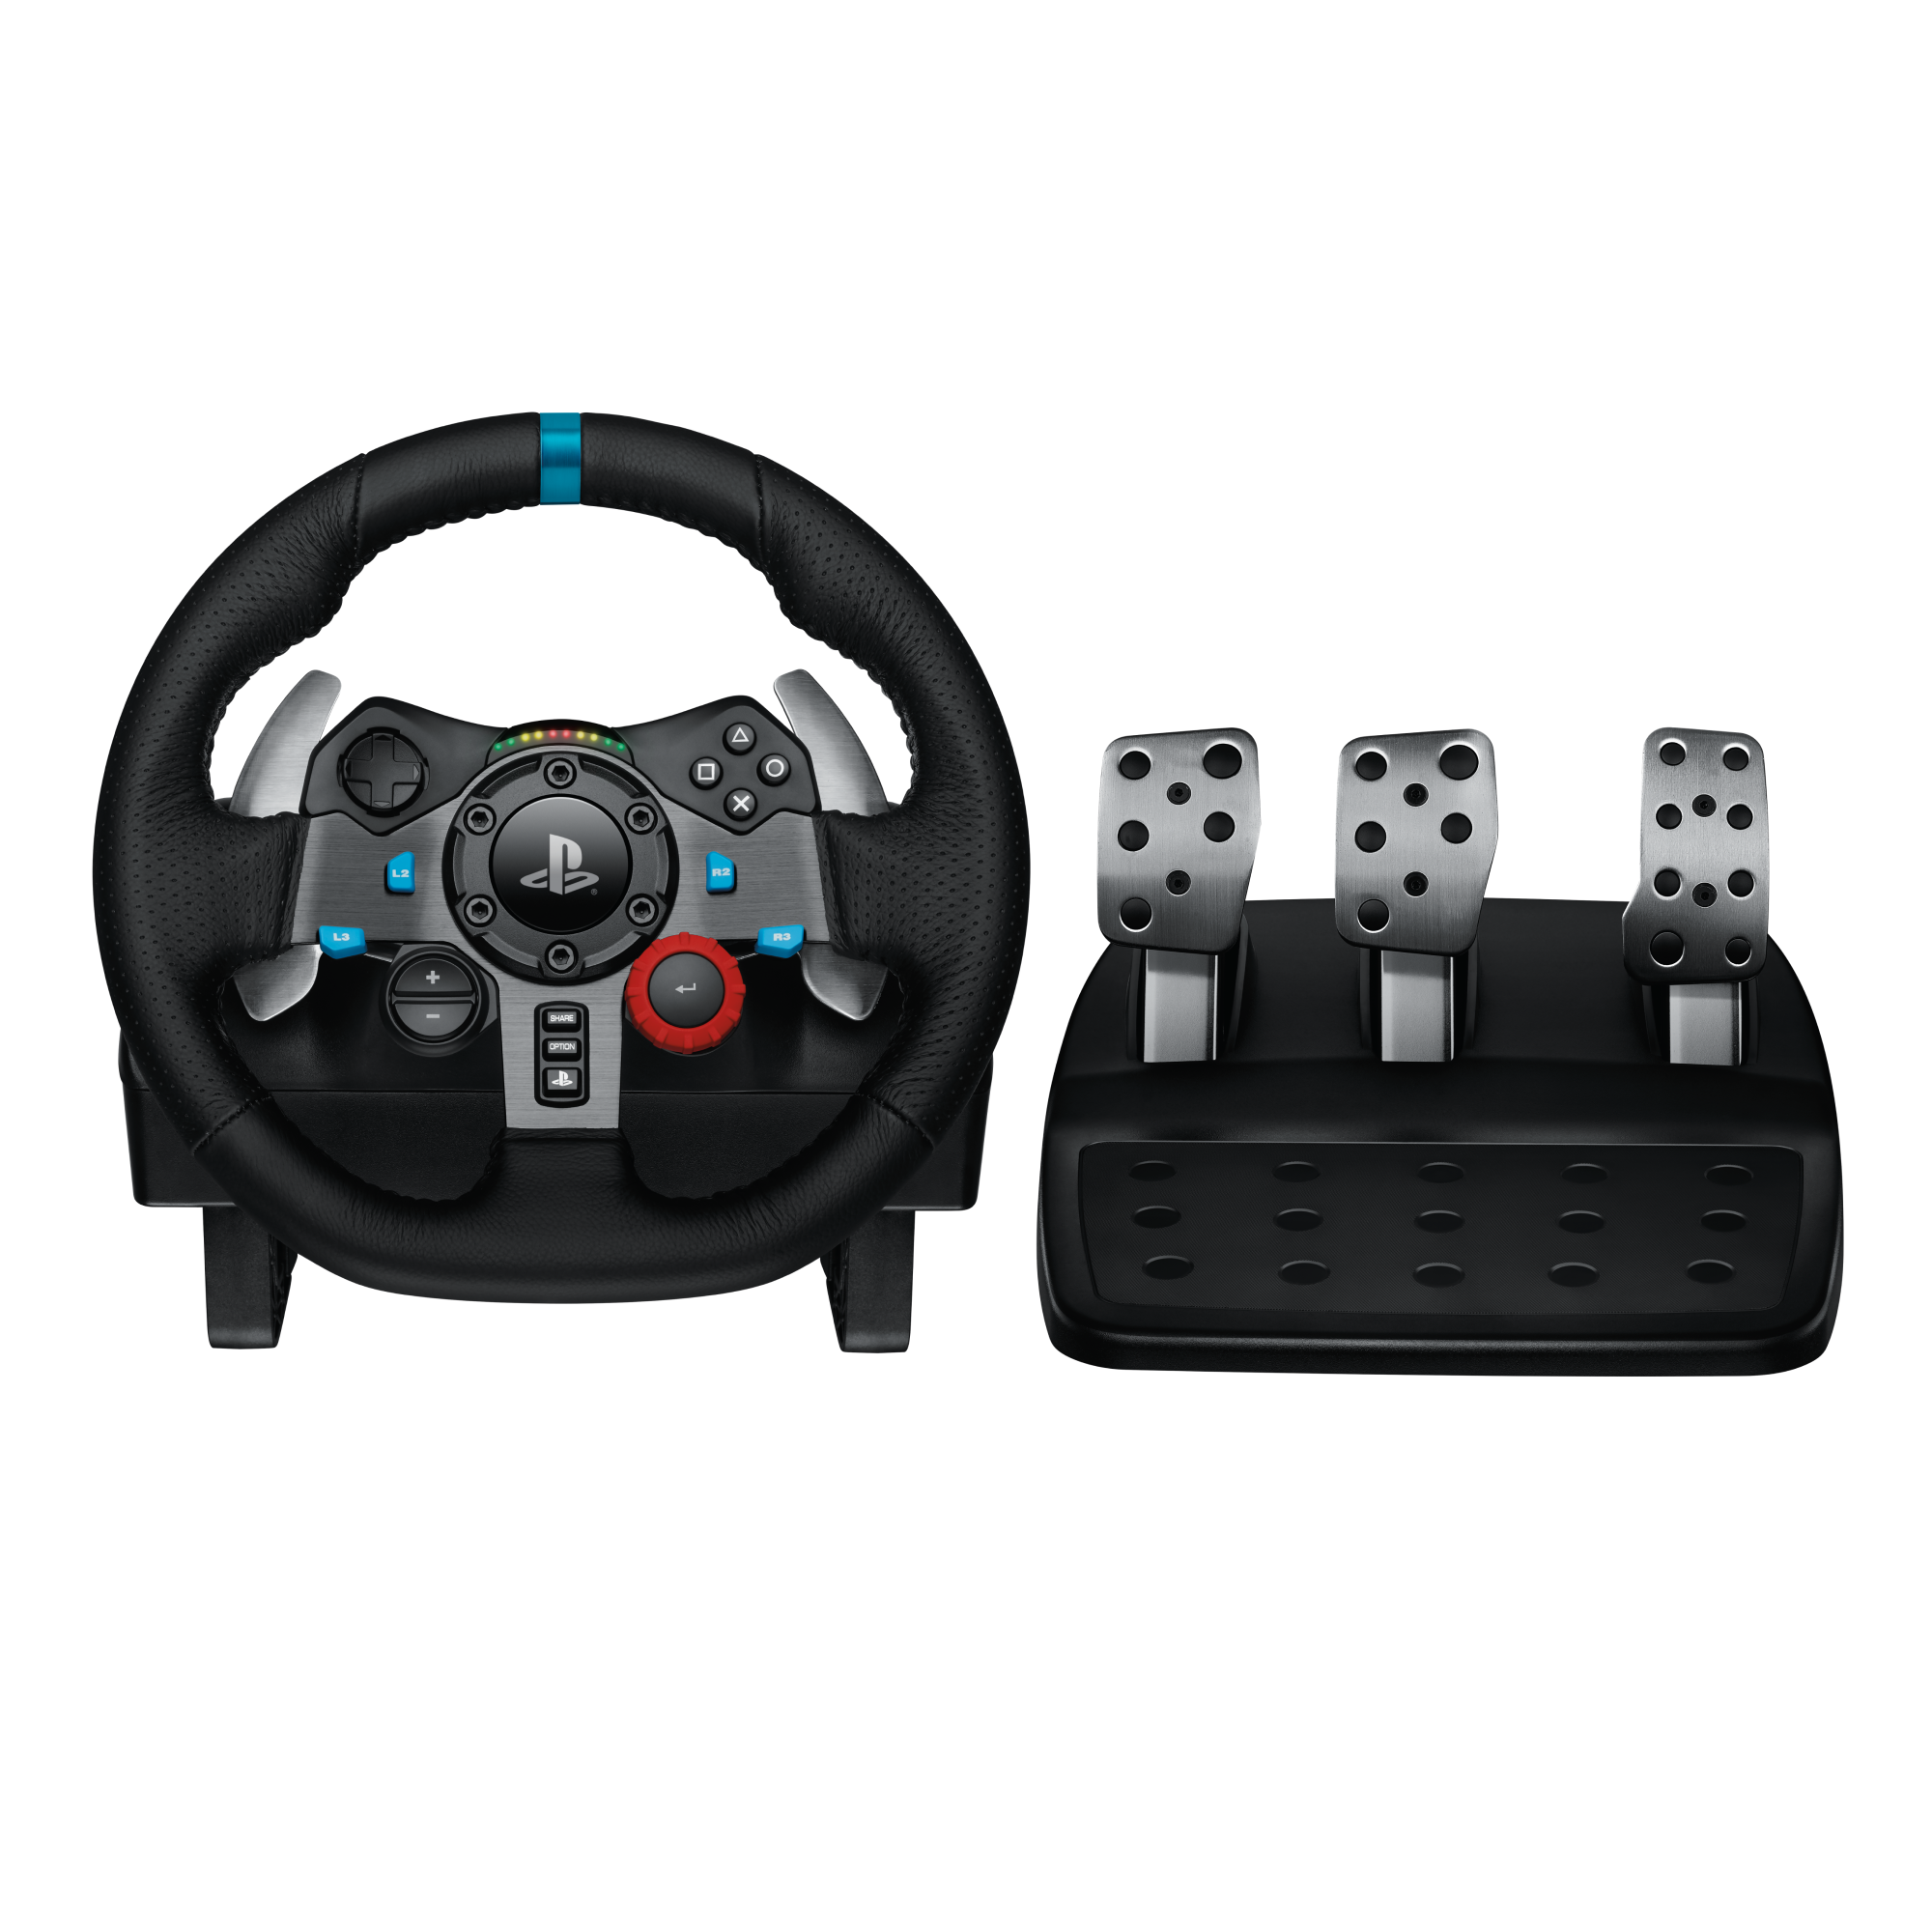 Logitech G29 Driving Force Racing Wheel for Playstation 4 | GameStop